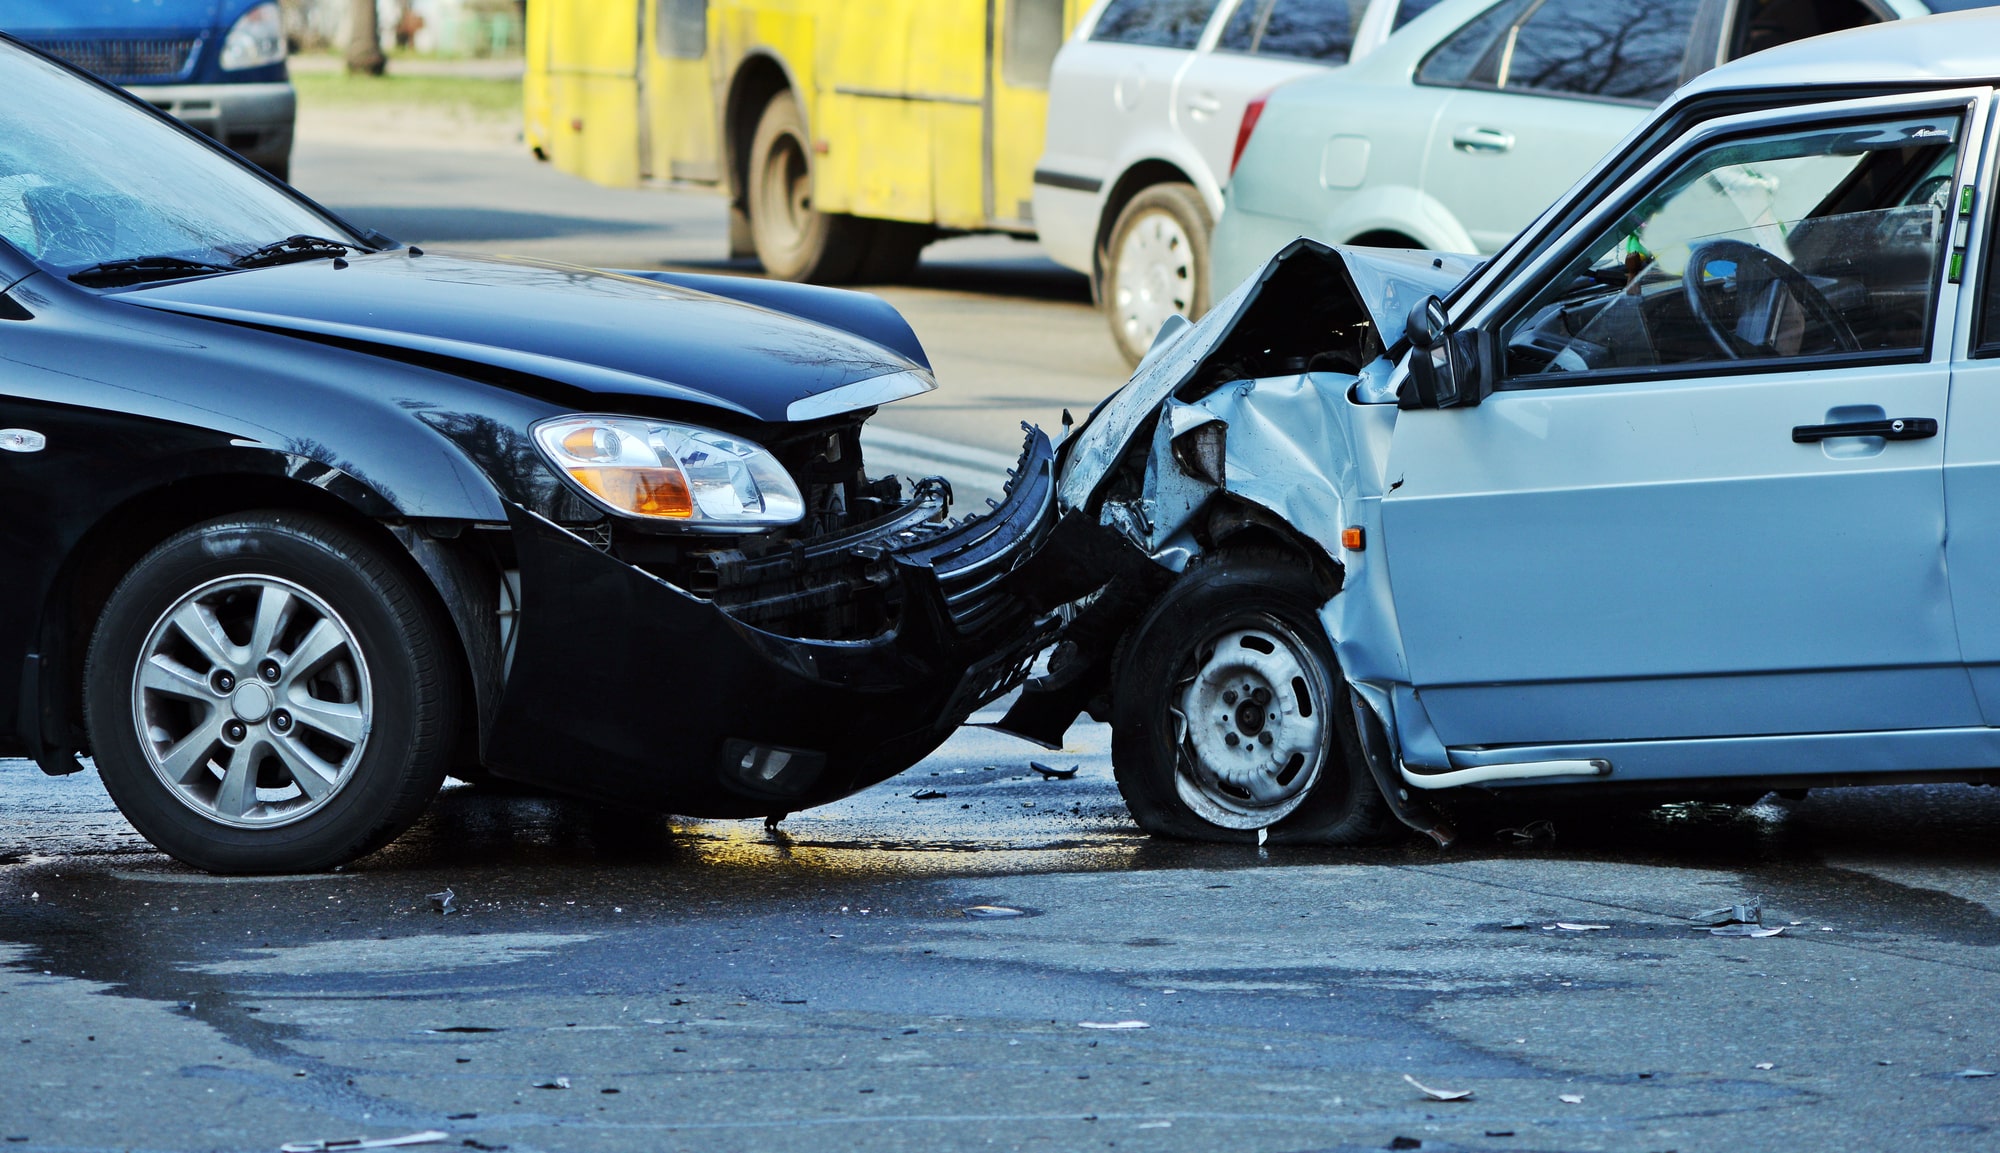 5 Critical Steps to Take Immediately After an Auto Crash